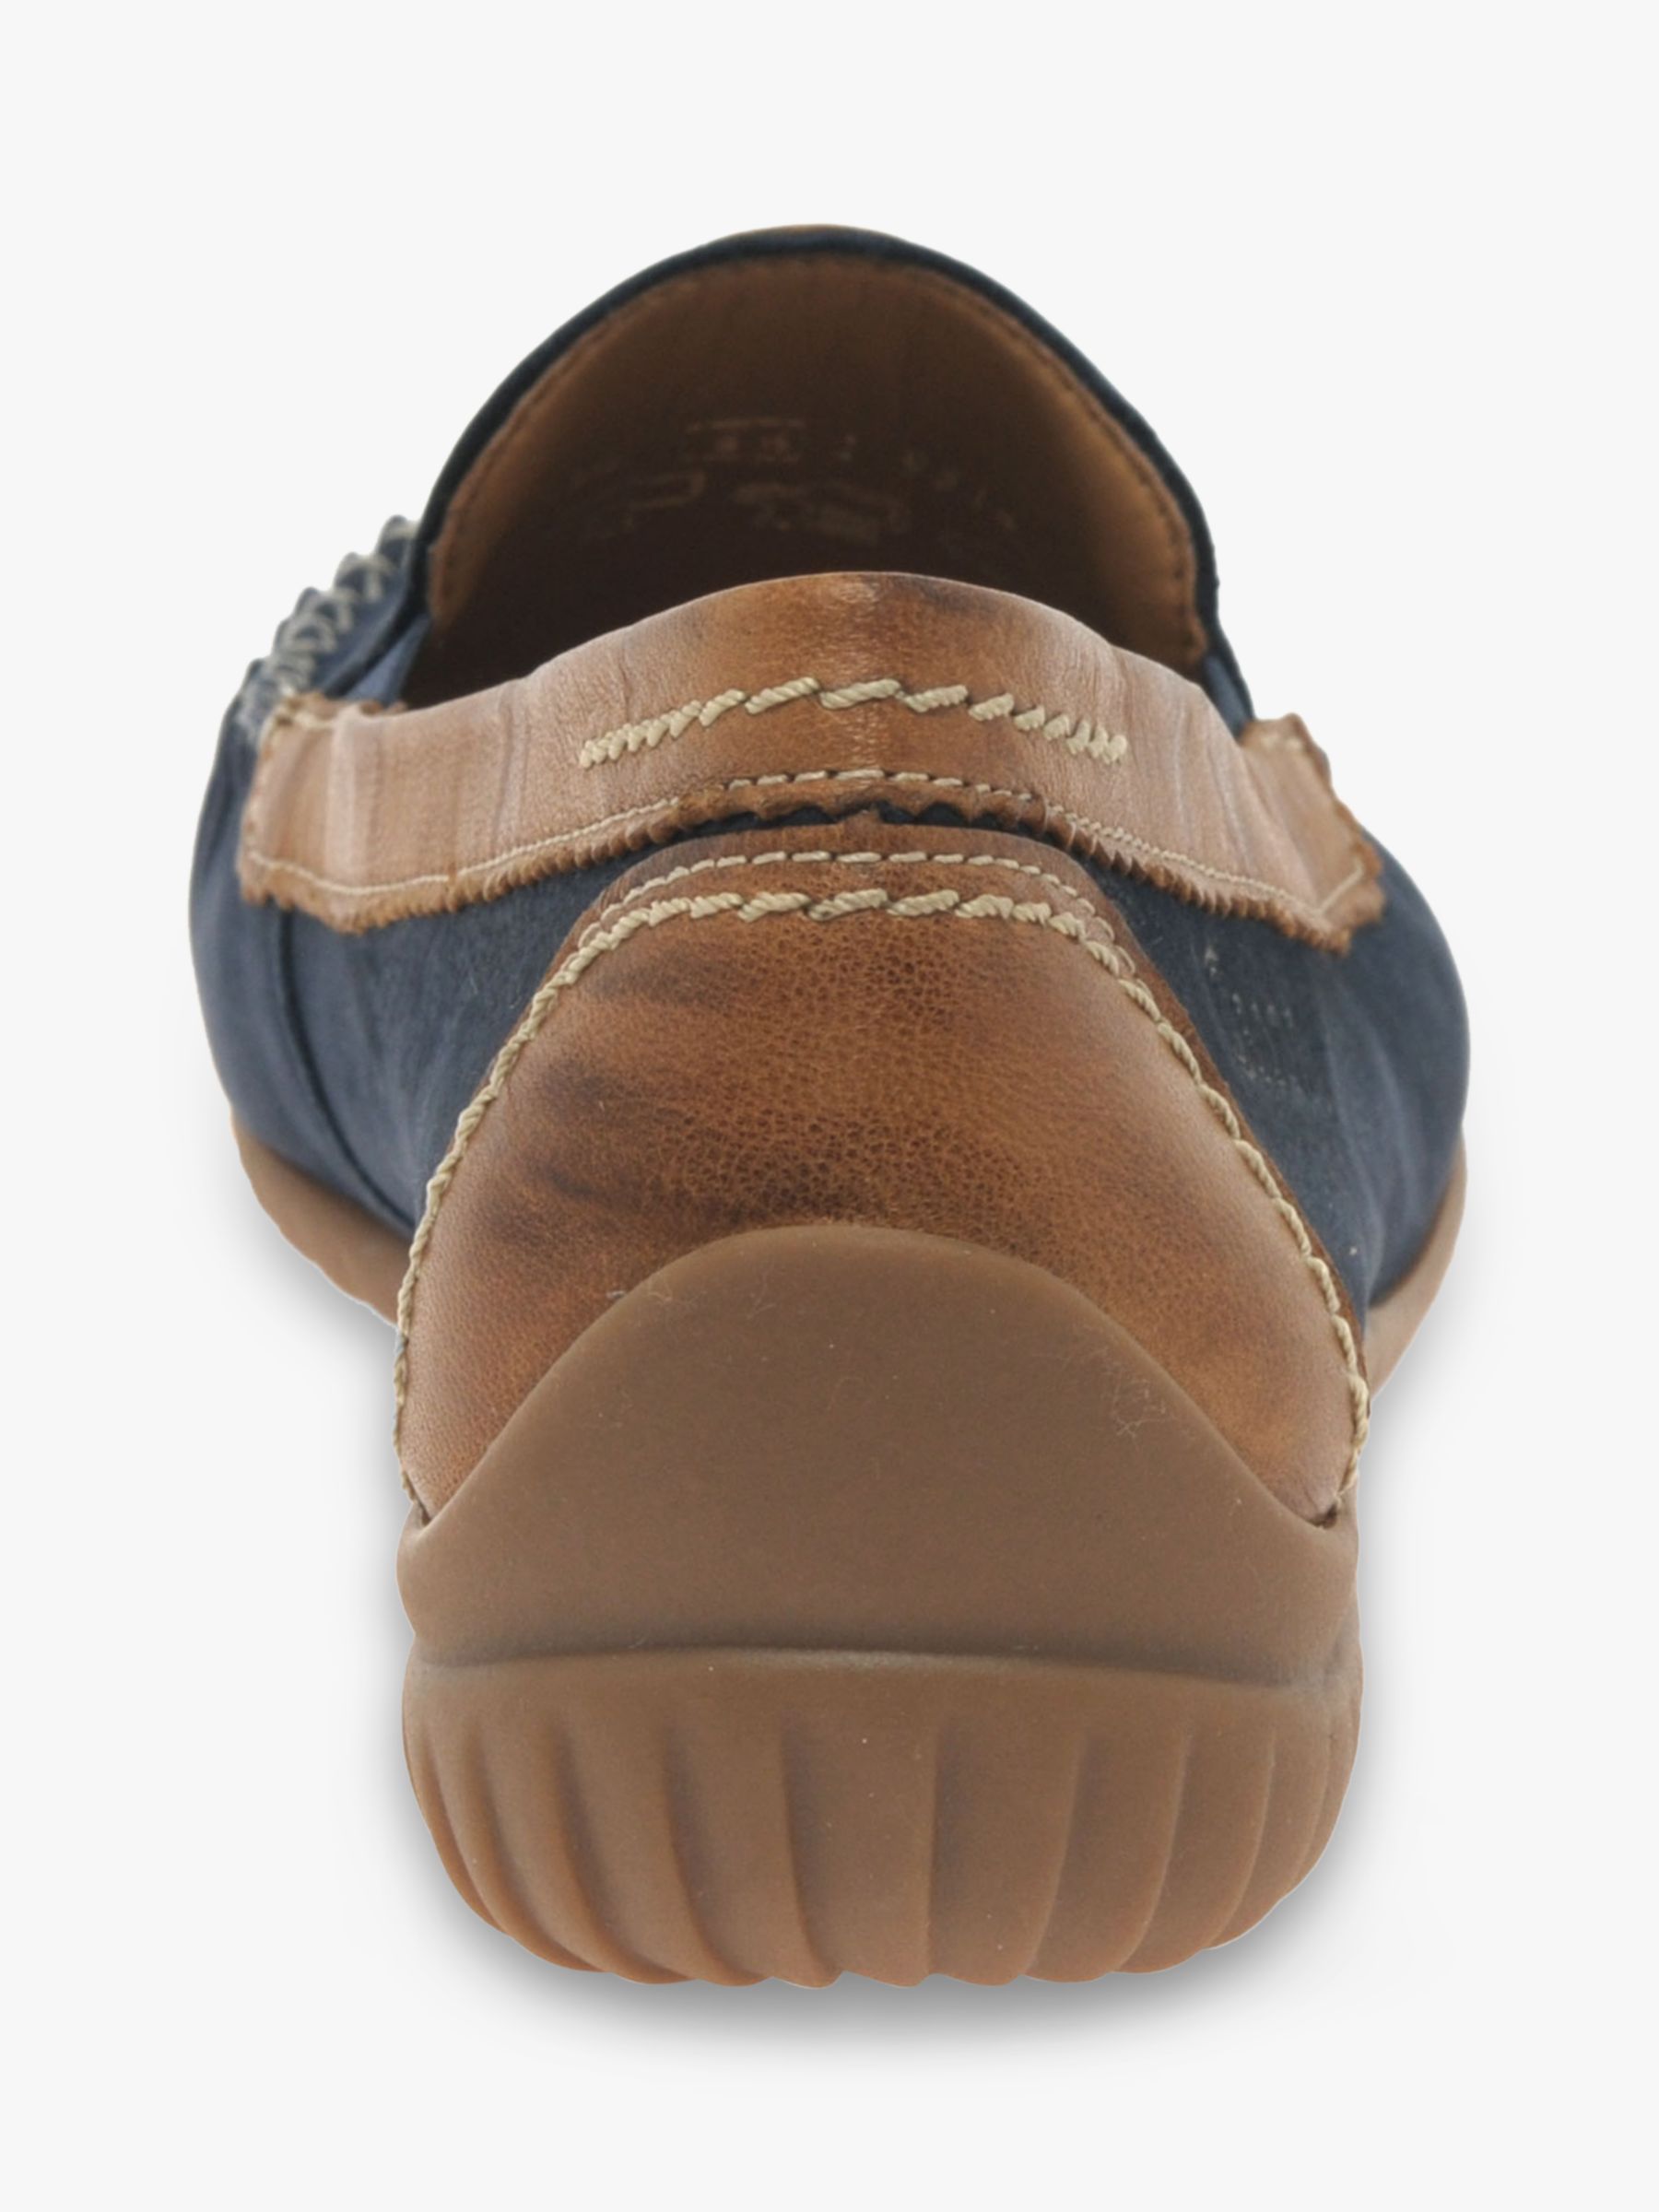 Buy Gabor California Wide Fit Moccasins, Navy Online at johnlewis.com